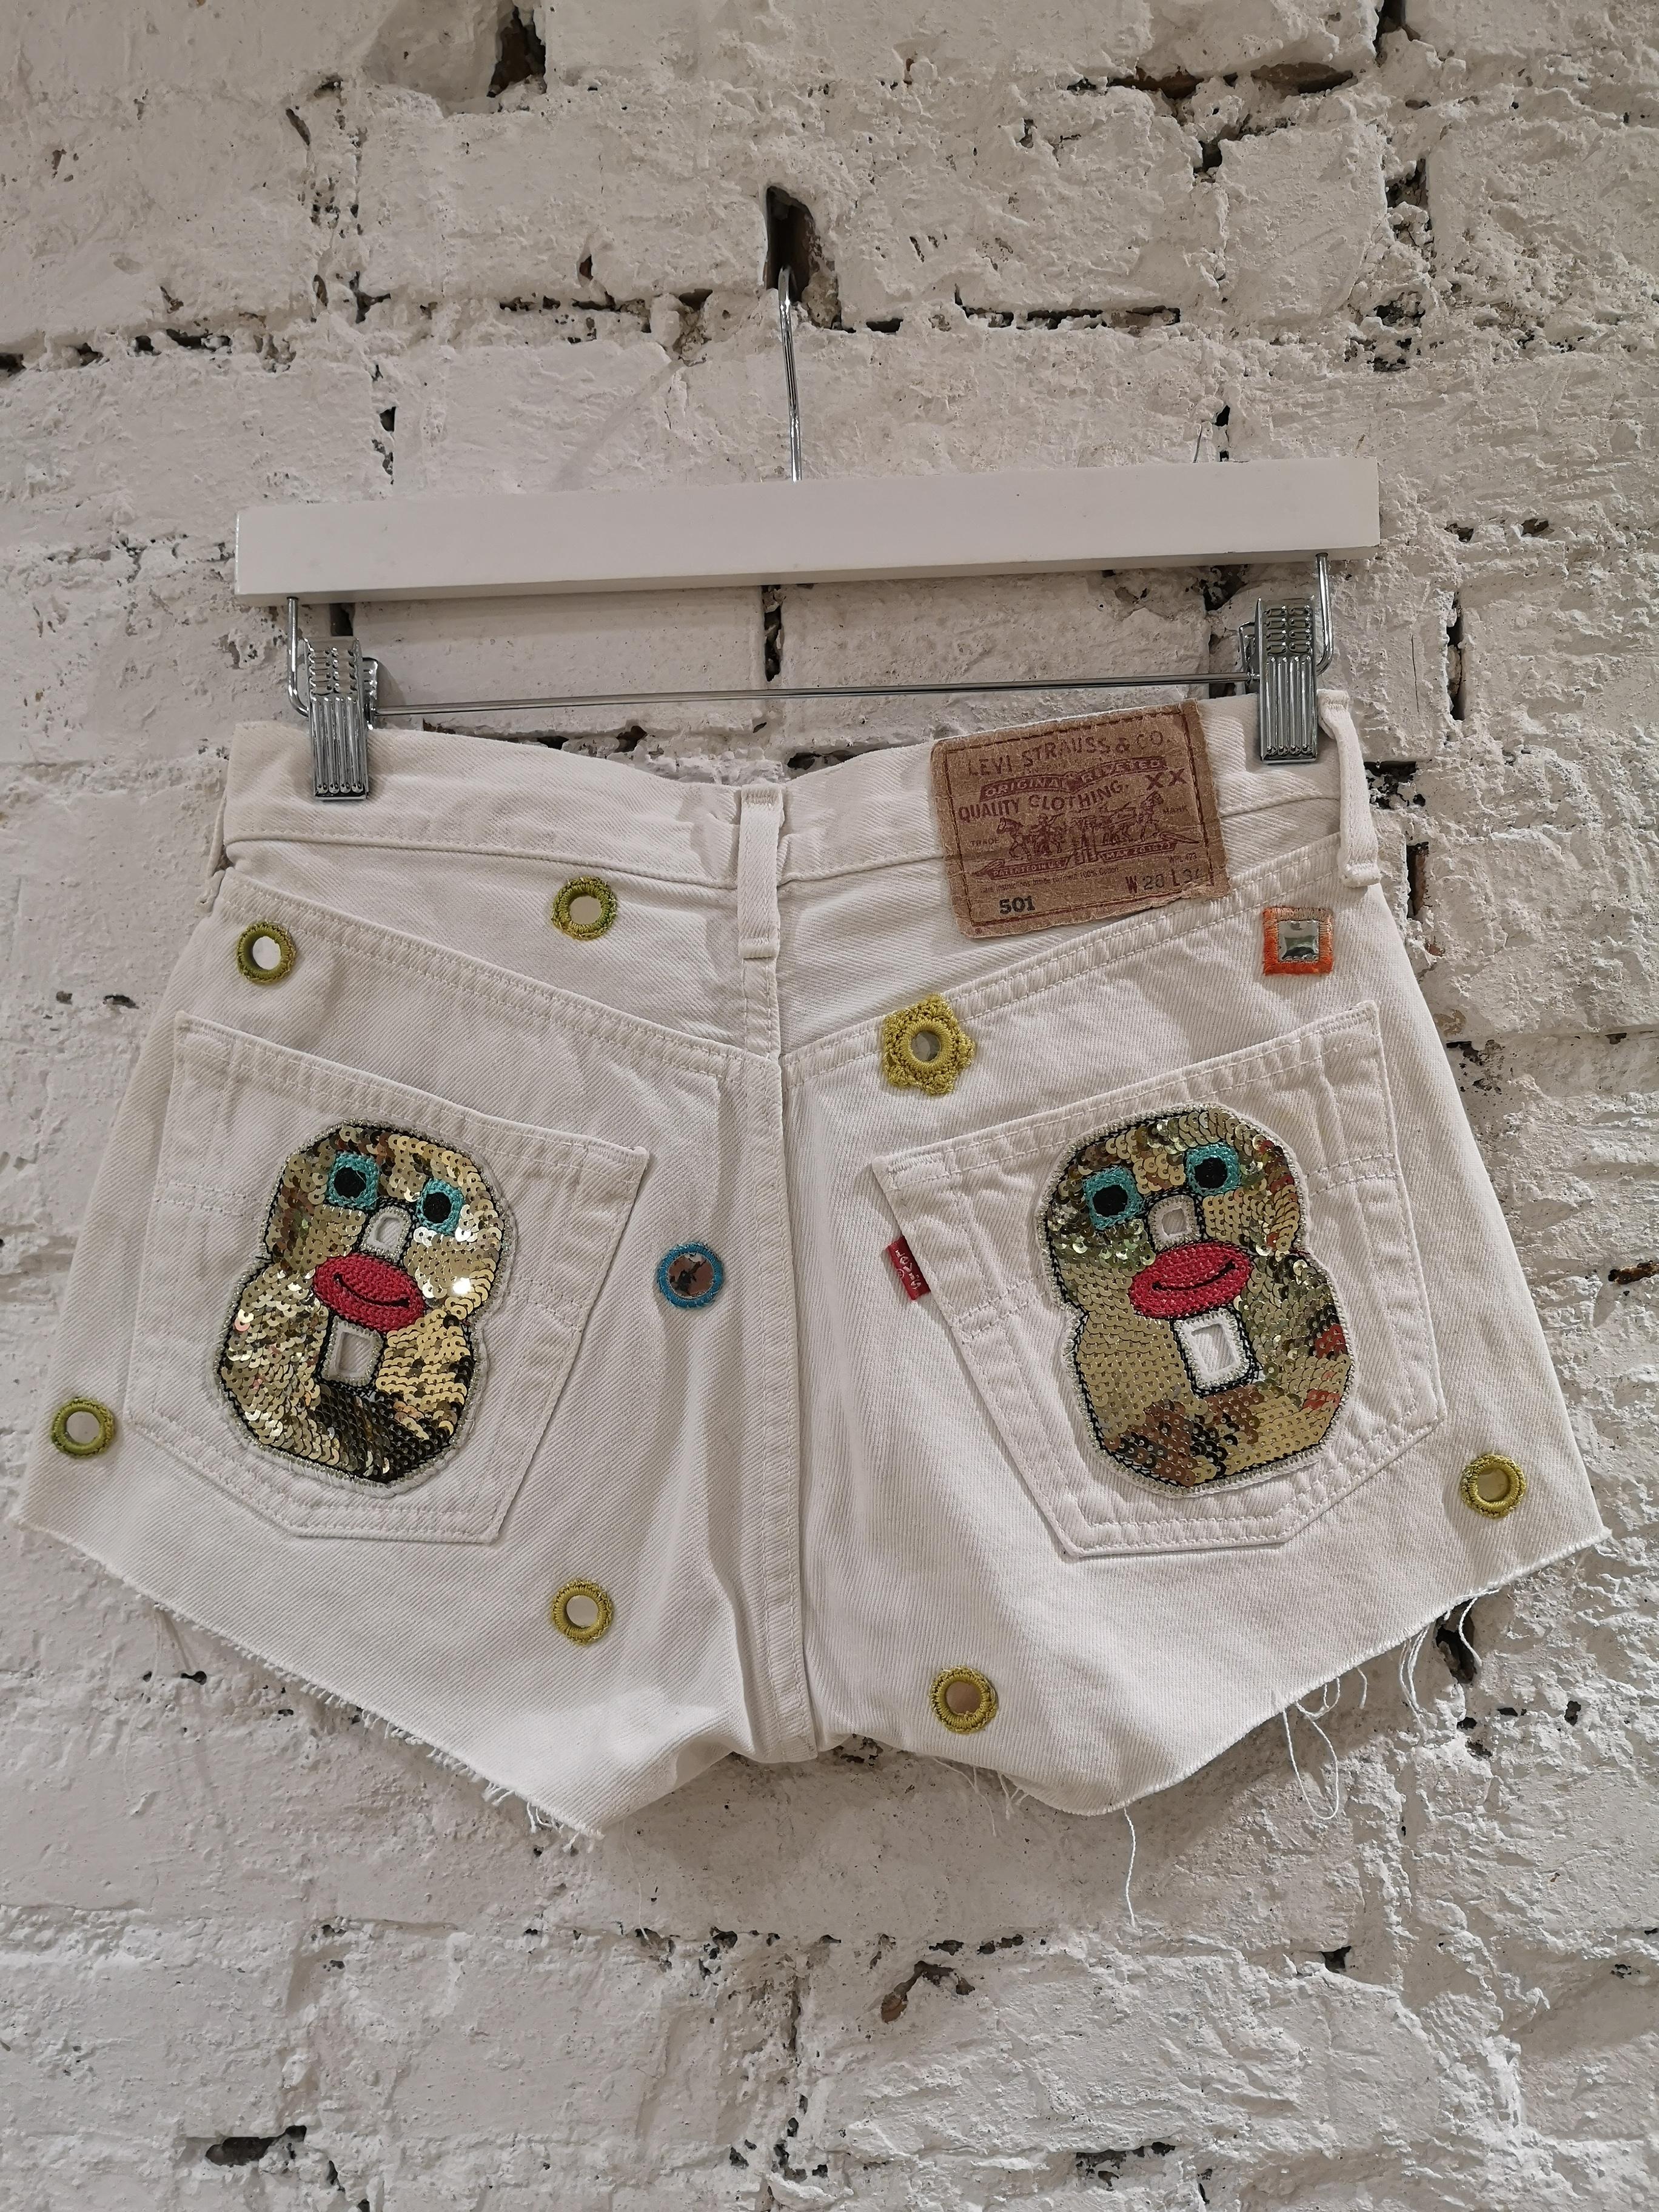 White customised SOAB shorts
vintage shorts recycled and customised totally handmade embellished with paiettes and patterns all over
composition: cotton
measurements: Waist 70 cm total lenght 27cm size marked 34 denim size